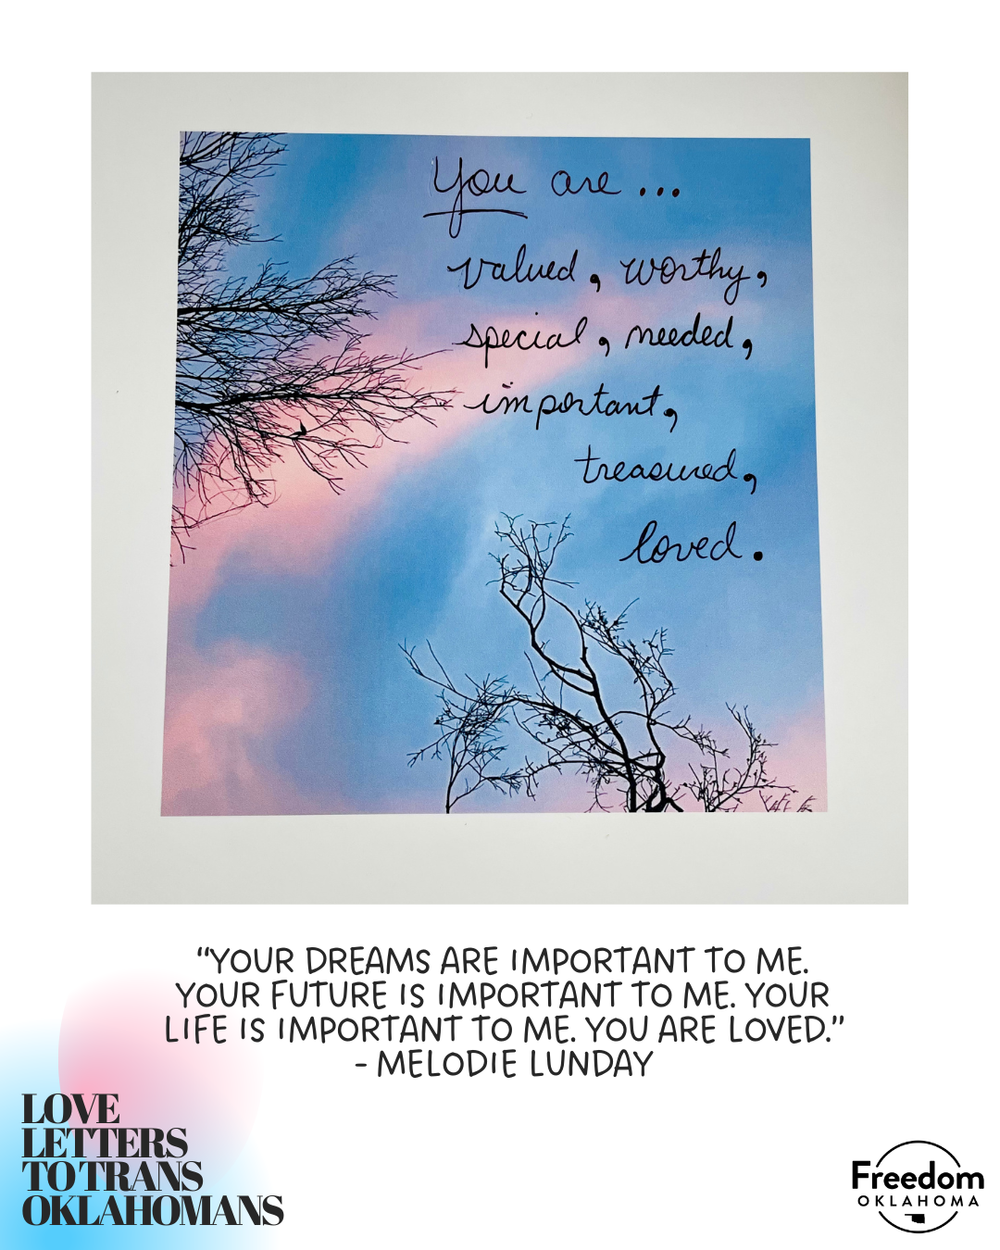  White background with "Love Letters to Trans Oklahomans" in the bottom left. Most of the image is an art submission: “Your dreams are important to me. Your future is important to me. Your life is important to me. You are loved.” - Melodie Lunday An 